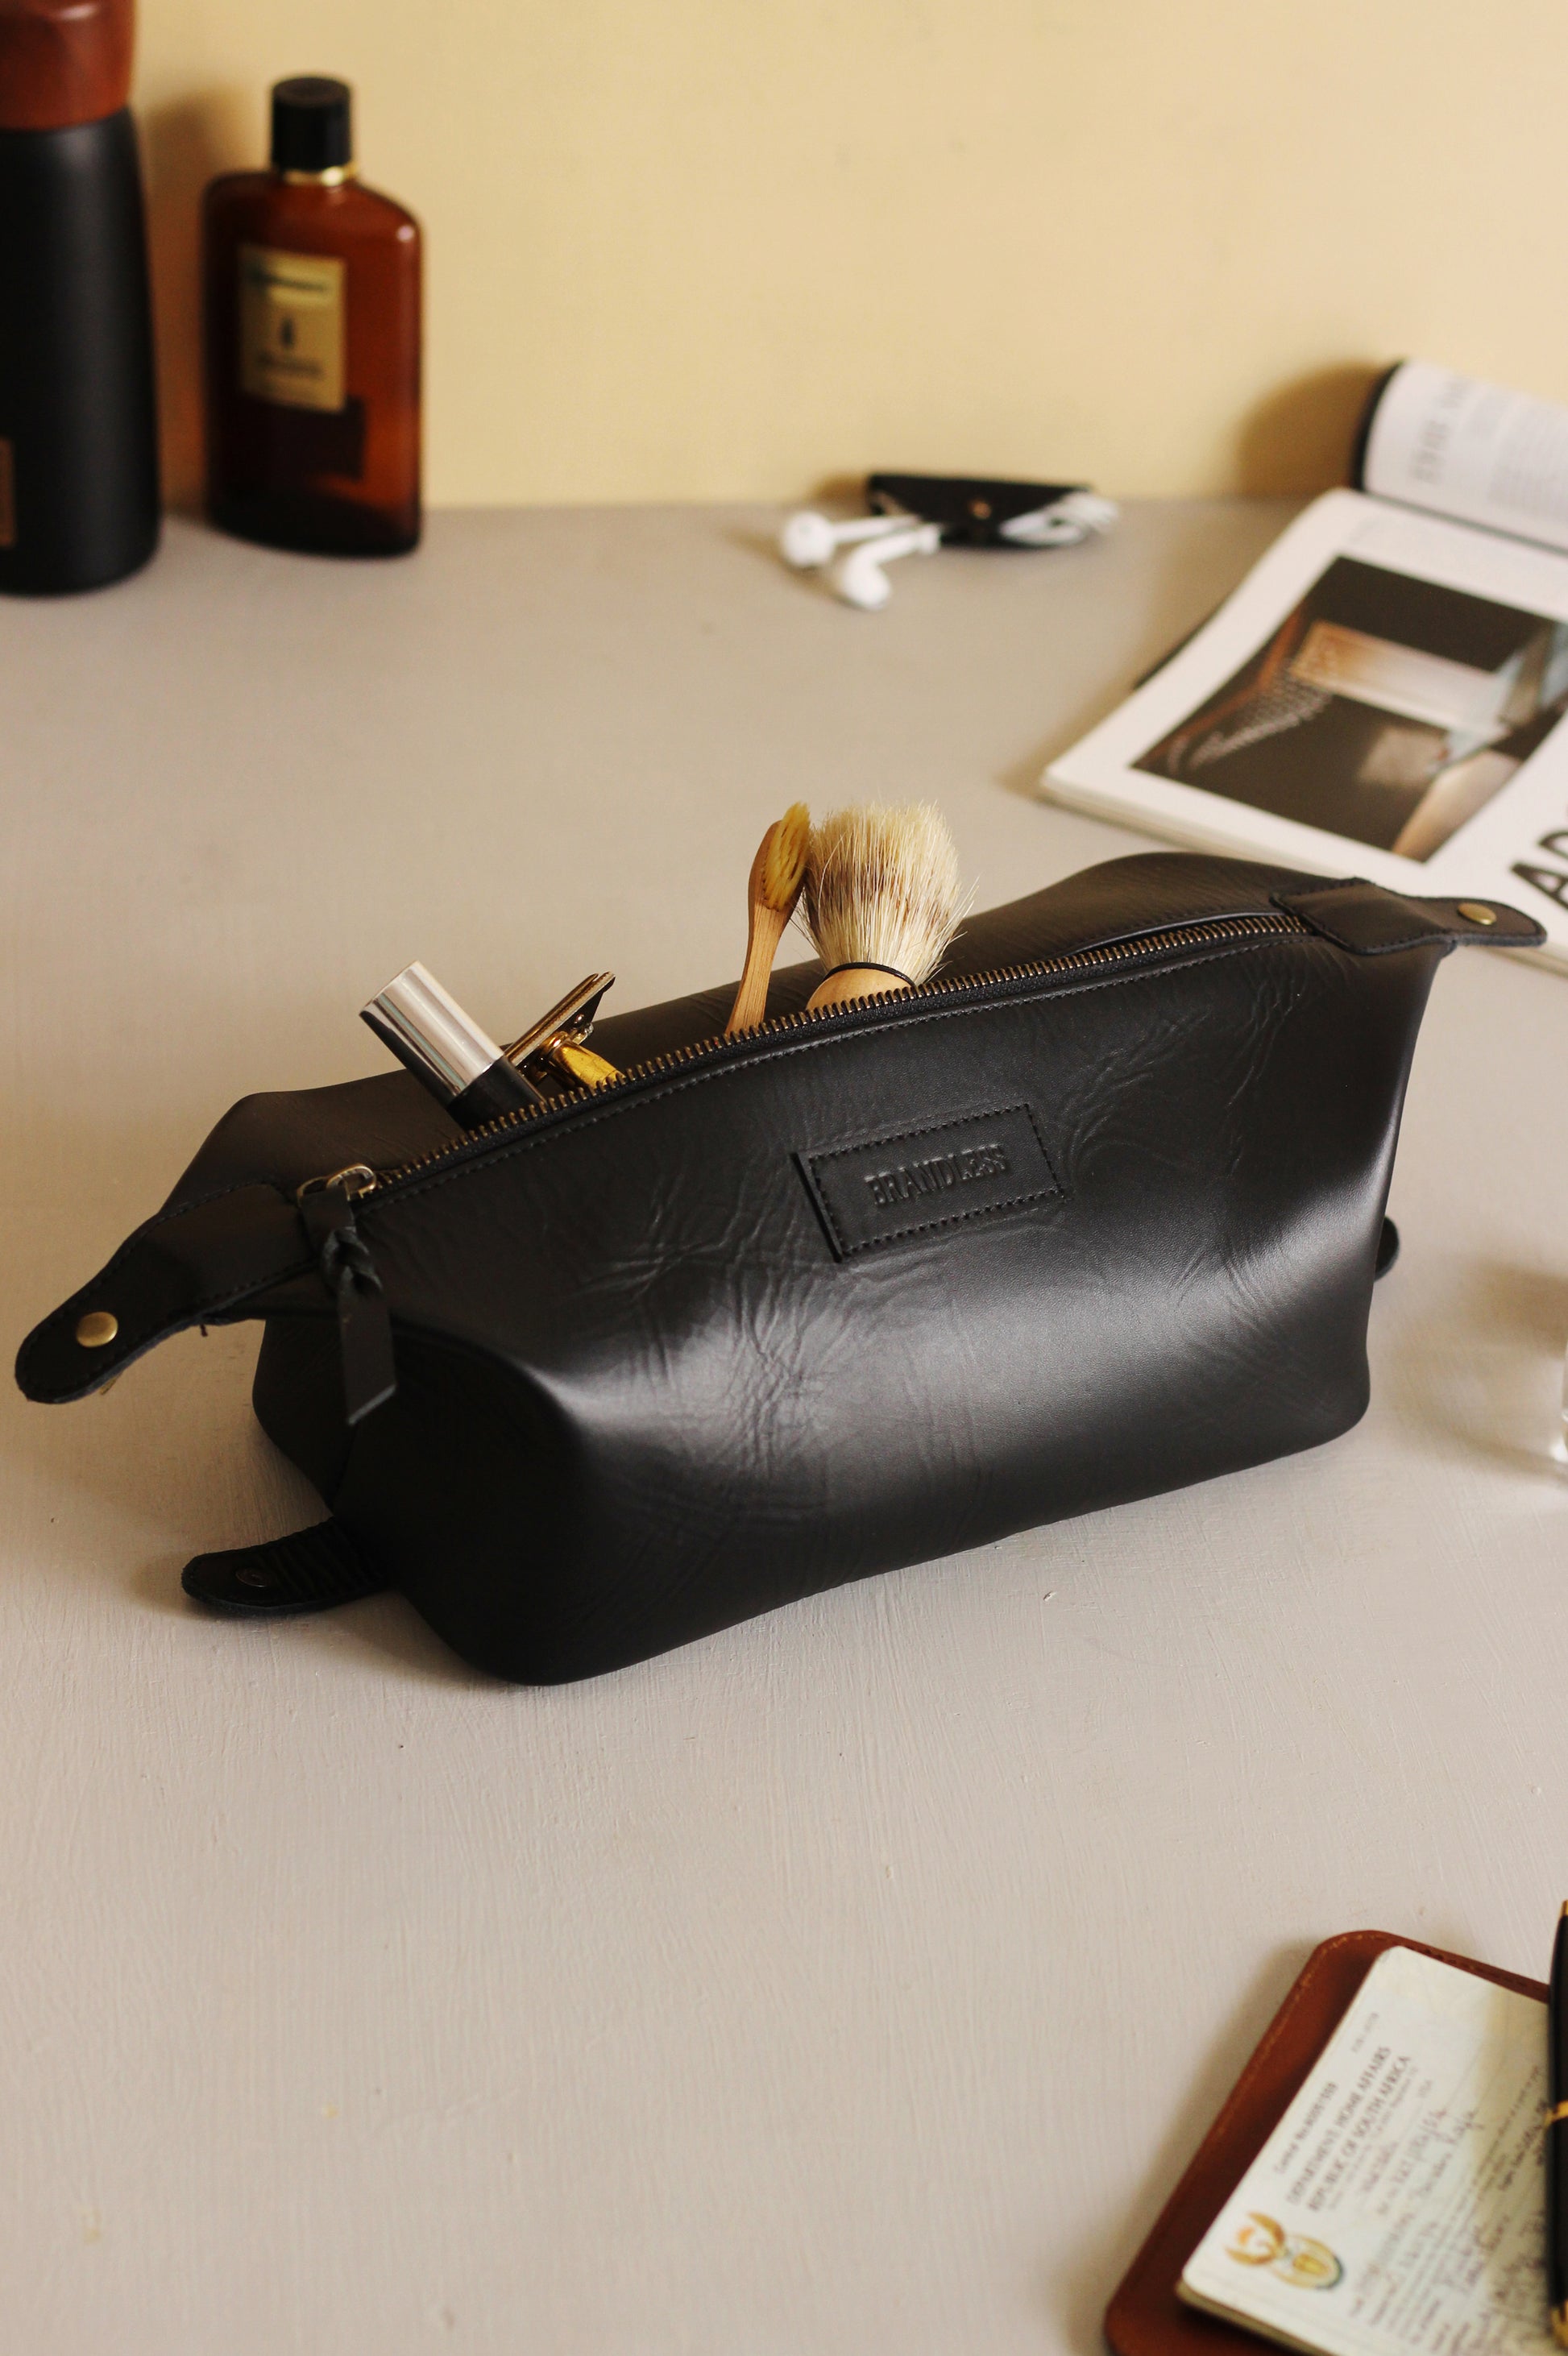 Travel Dopp Kit handcrafted in genuine leather. Mens grooming essential. Luxury Corporate Gifting. Leather Shaving Kit by Brandless